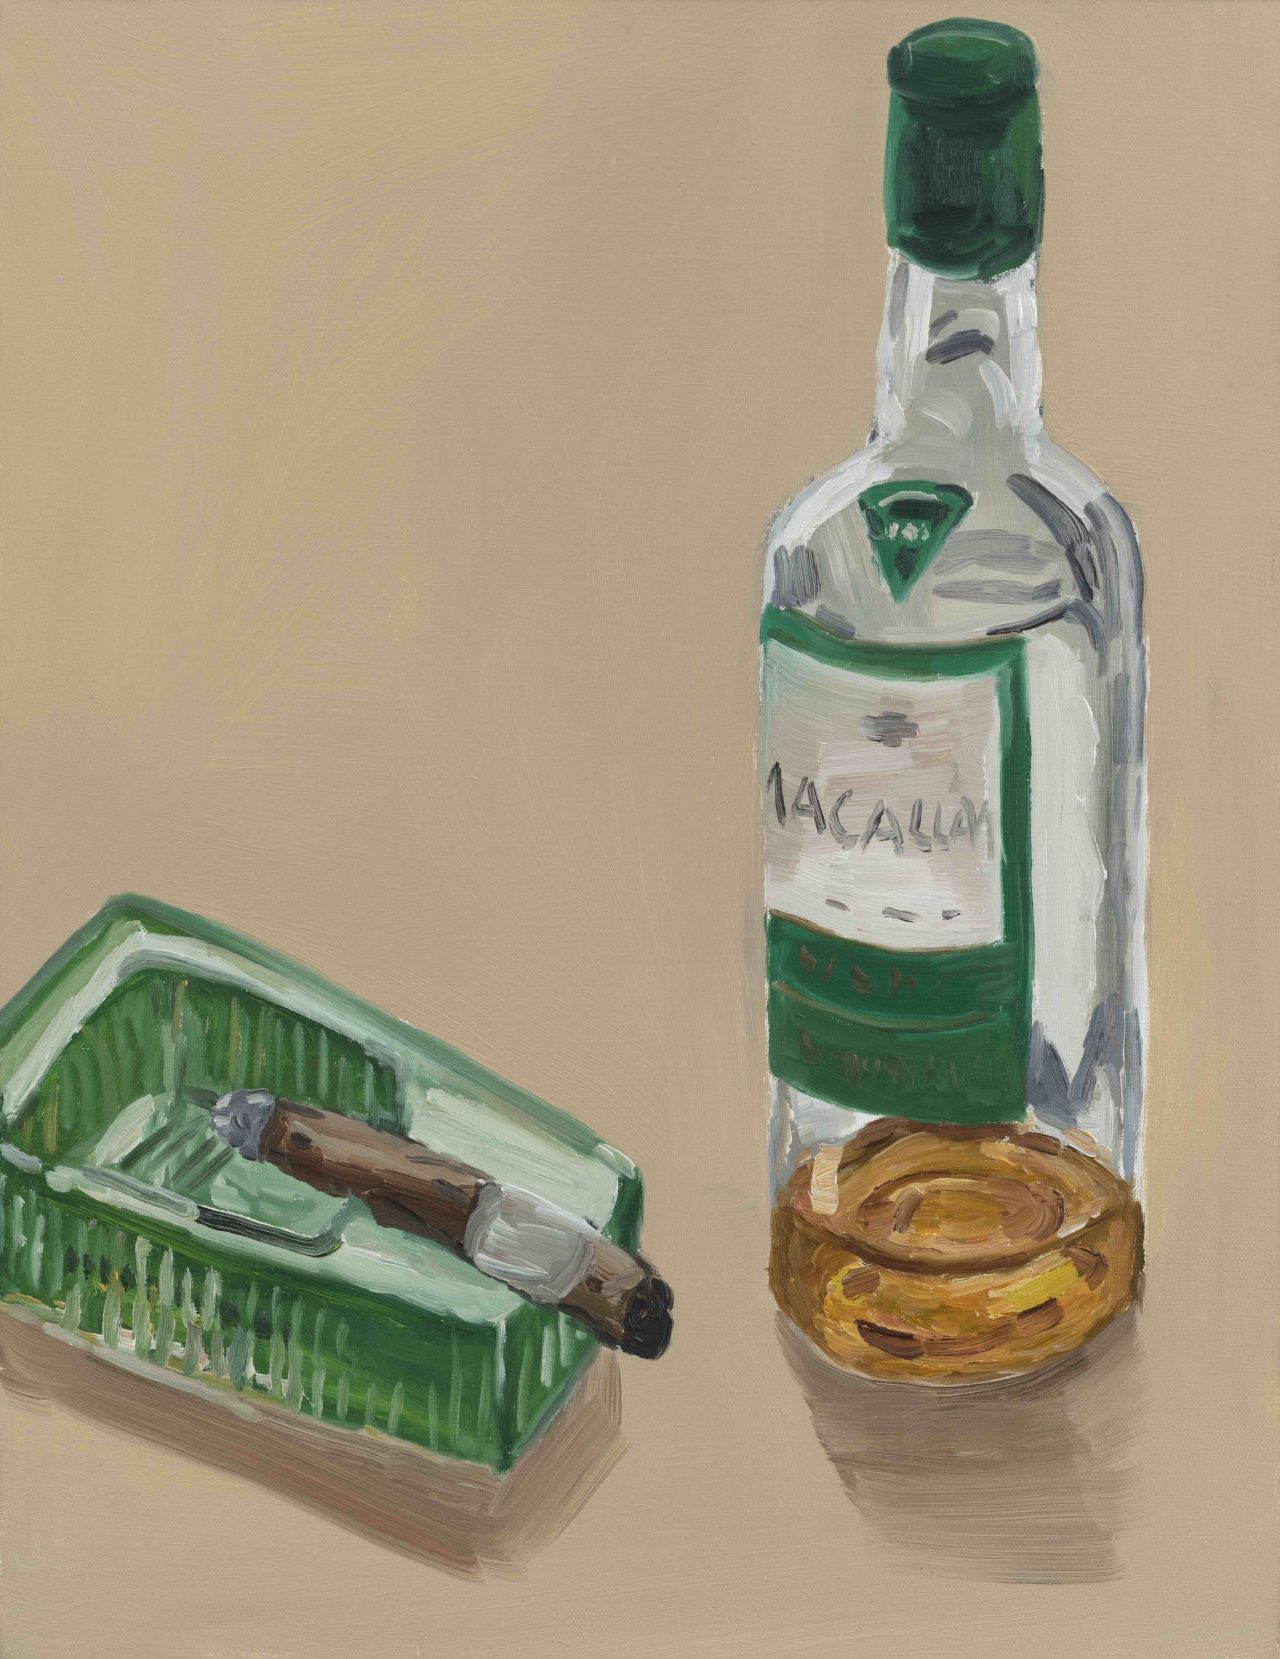 "The North-East" Series–Whisky and Cigar